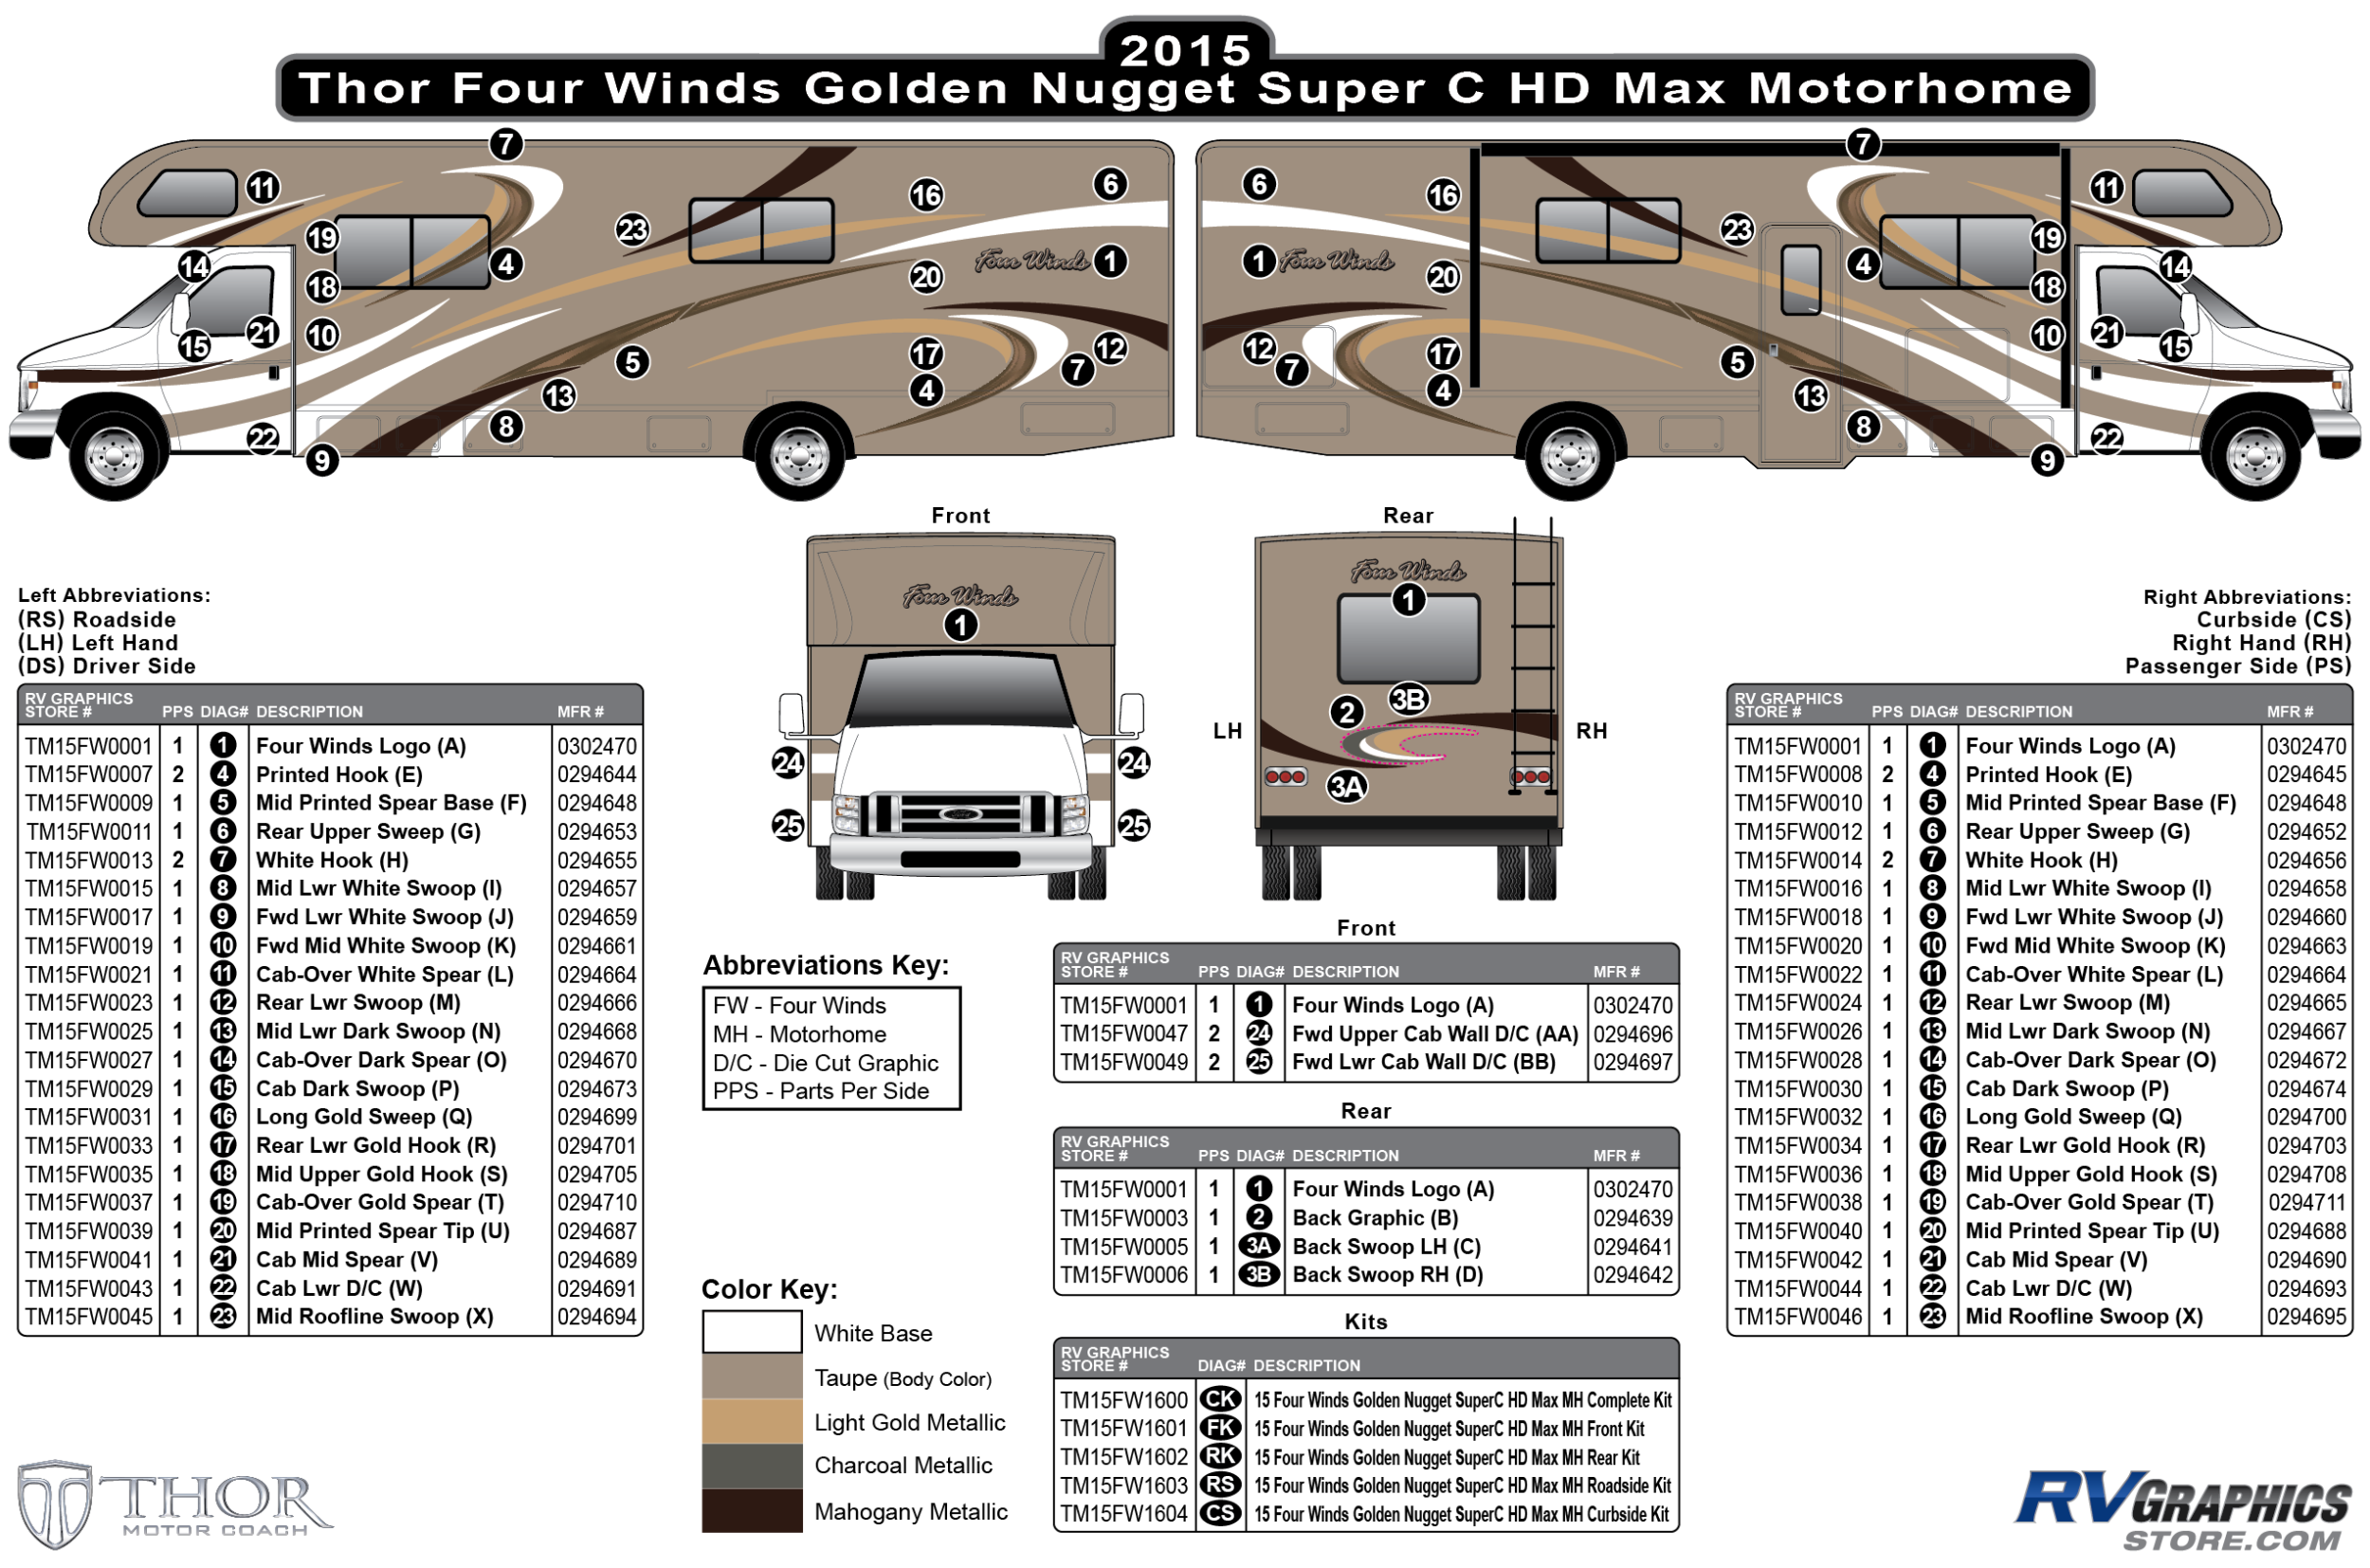 Four Winds - 2015 Four Winds MH-Motorhome Super C Golden Nugget